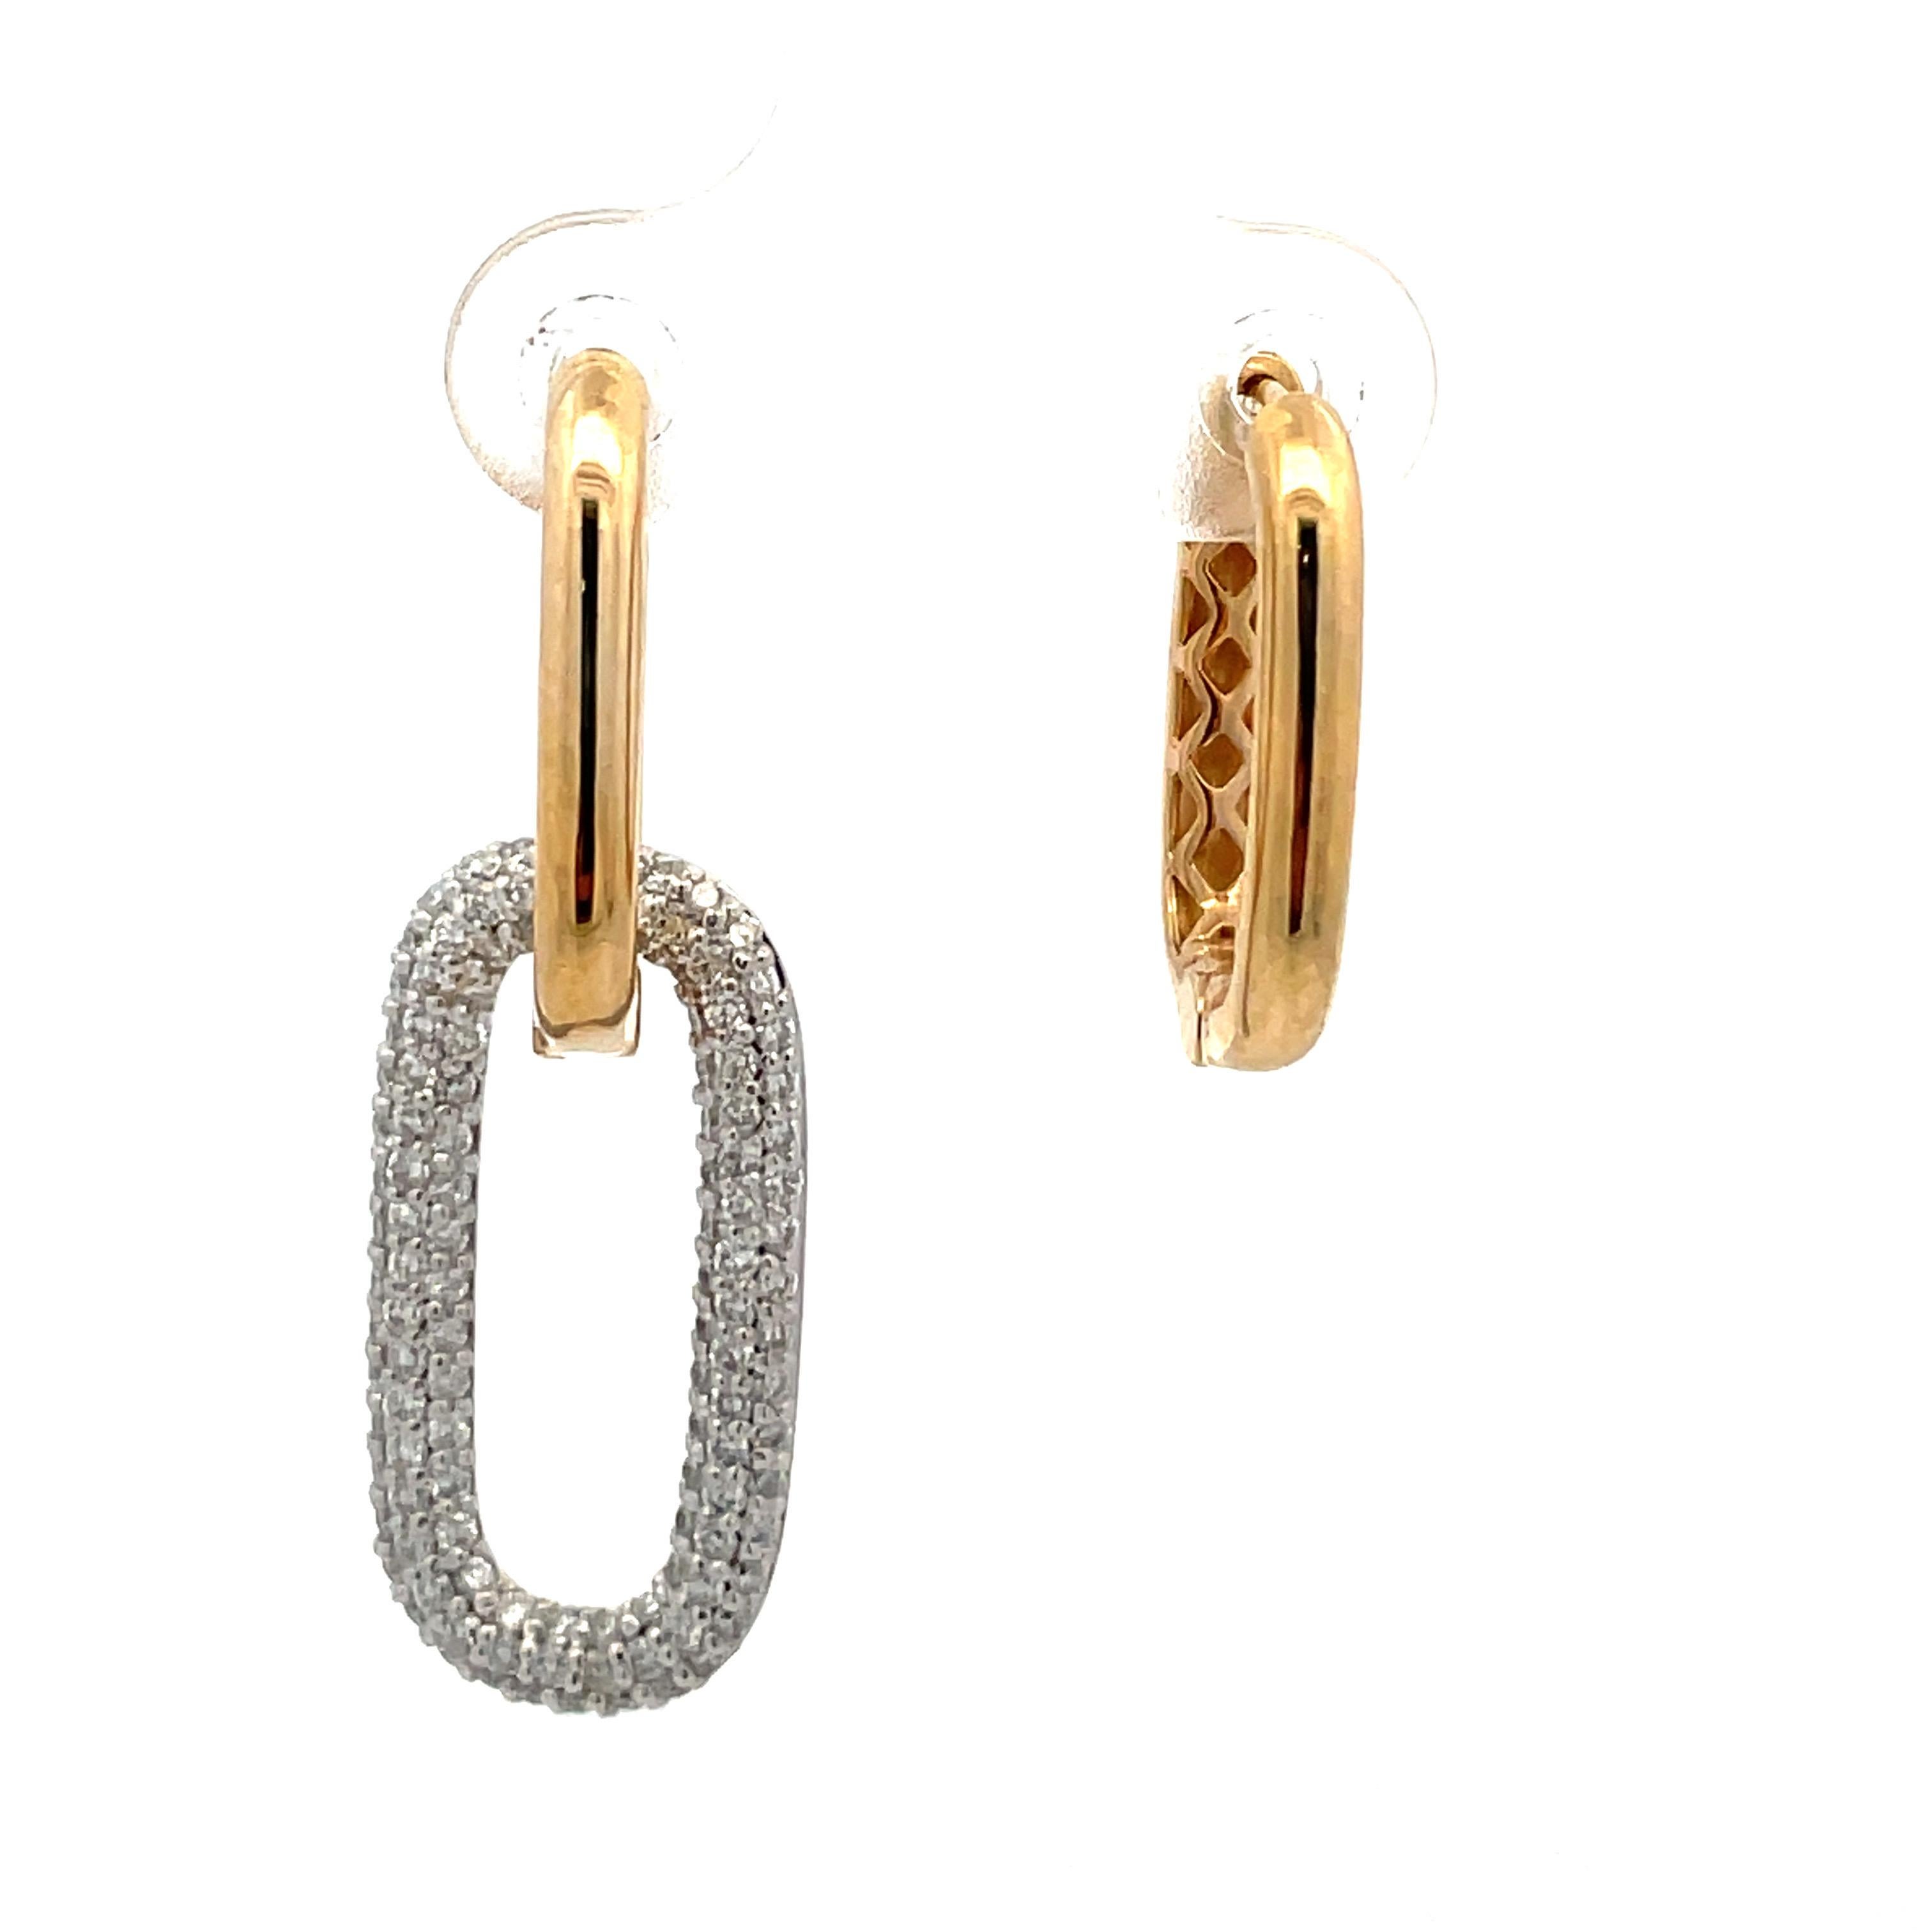 Diamond hoop link earrings featuring 244 round brilliants weighing 1.68 Carats in 14 karat yellow & white gold.
Diamond Hoop is detachable and yellow hoop can be worn alone. 
Full of sparkle!

Yellow Hoop Length: 3/4